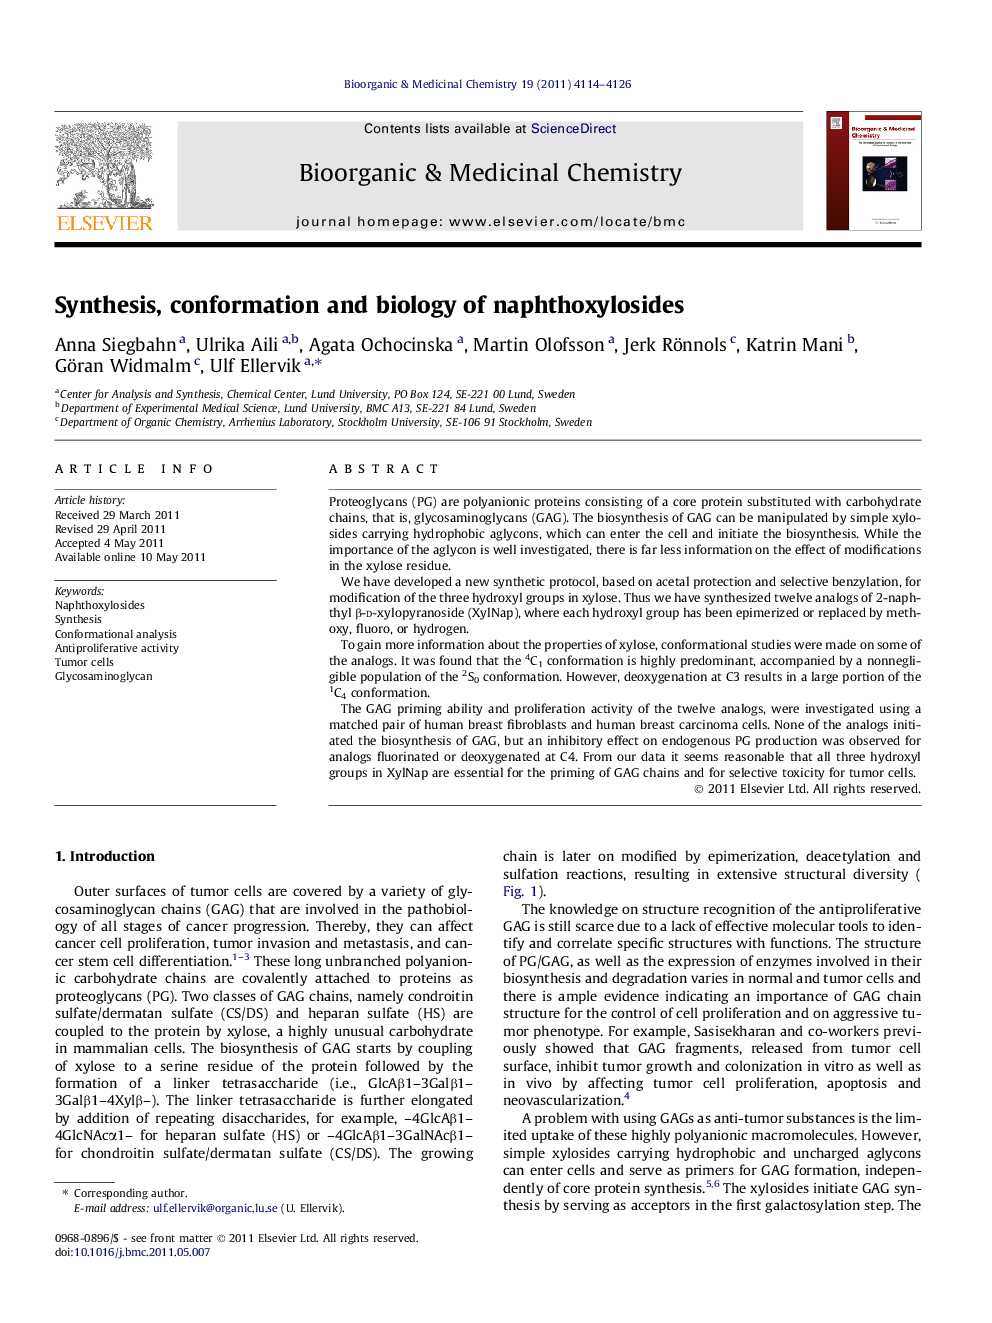 Synthesis, conformation and biology of naphthoxylosides